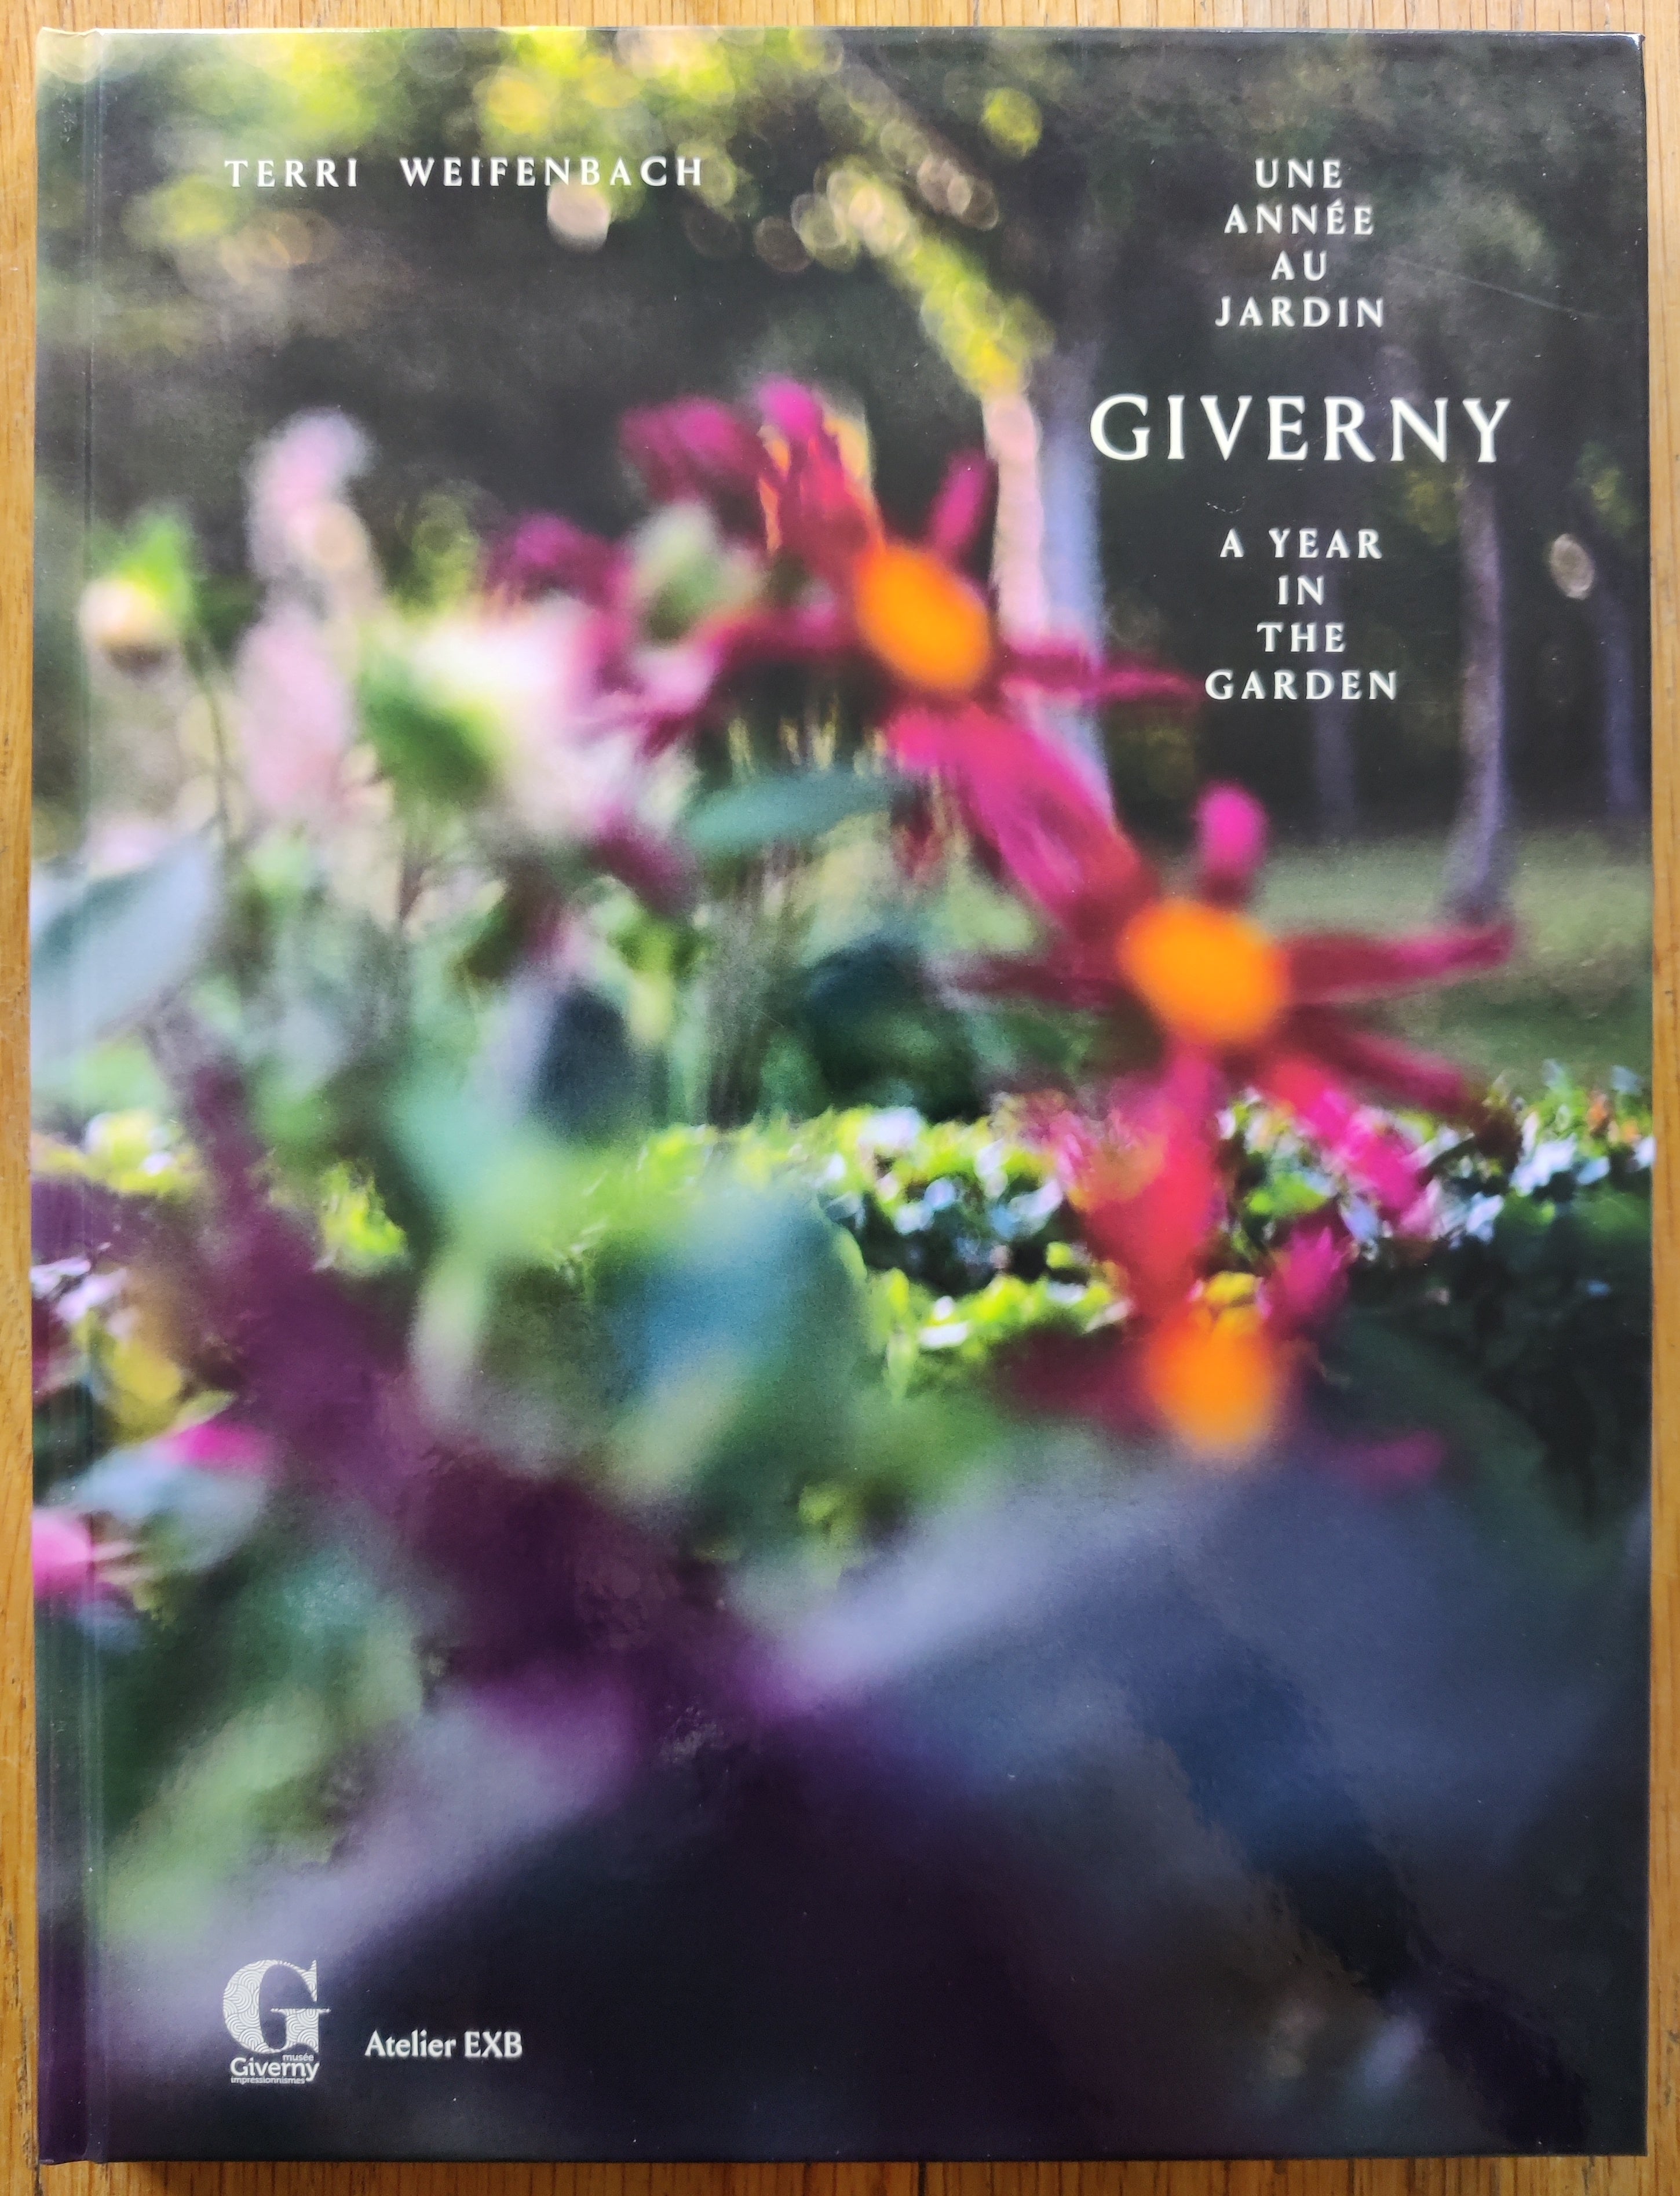 Buy Giverny: A Year In The Garden by Terri Weifenbach Online